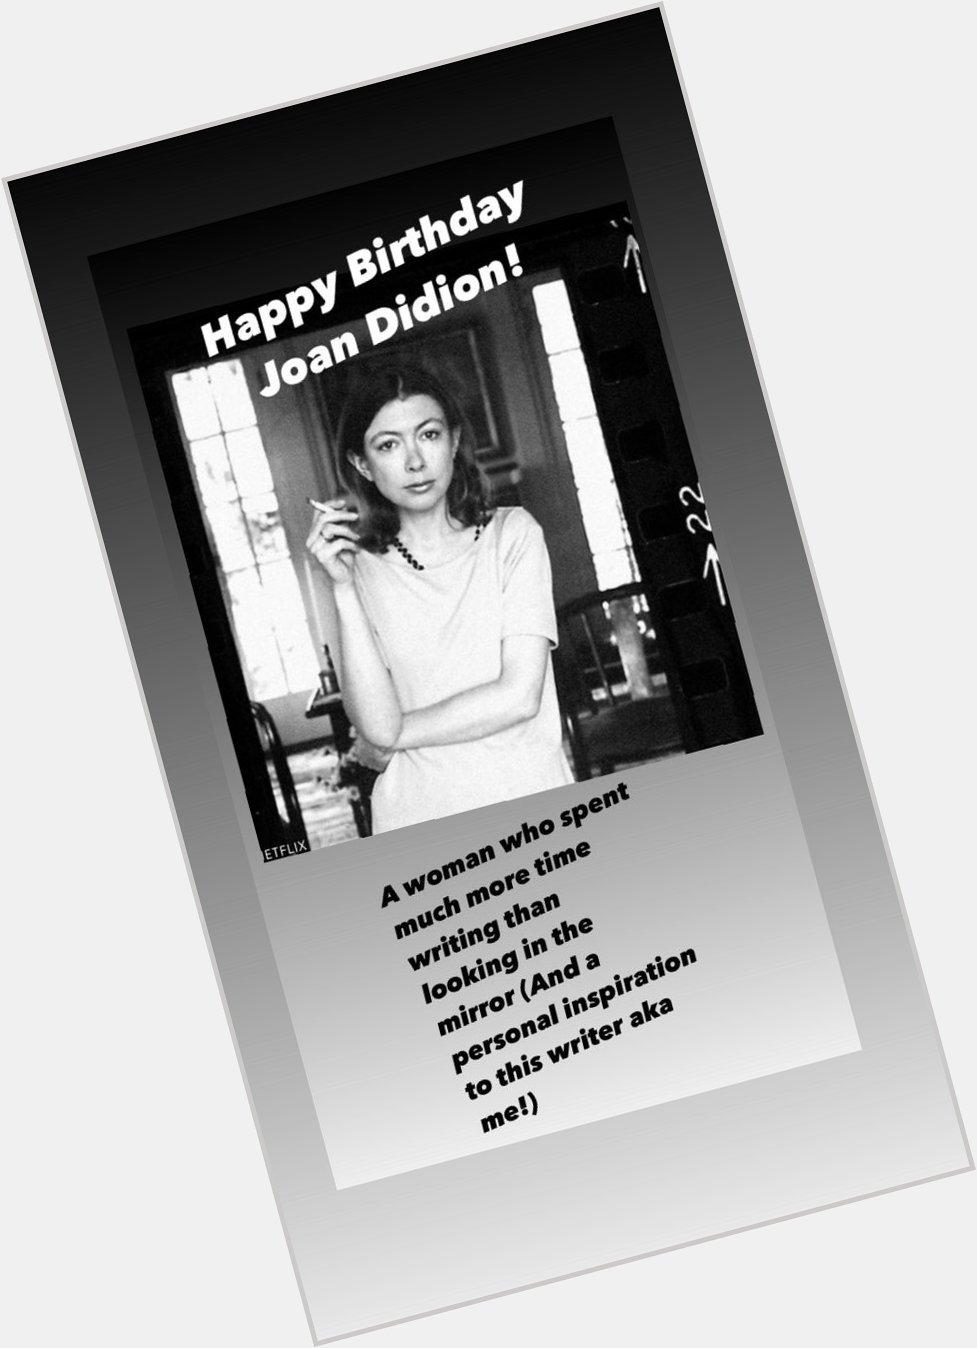 Happy Birthday Joan Didion! The precision of your inspires me always. You were no poser, lady!   